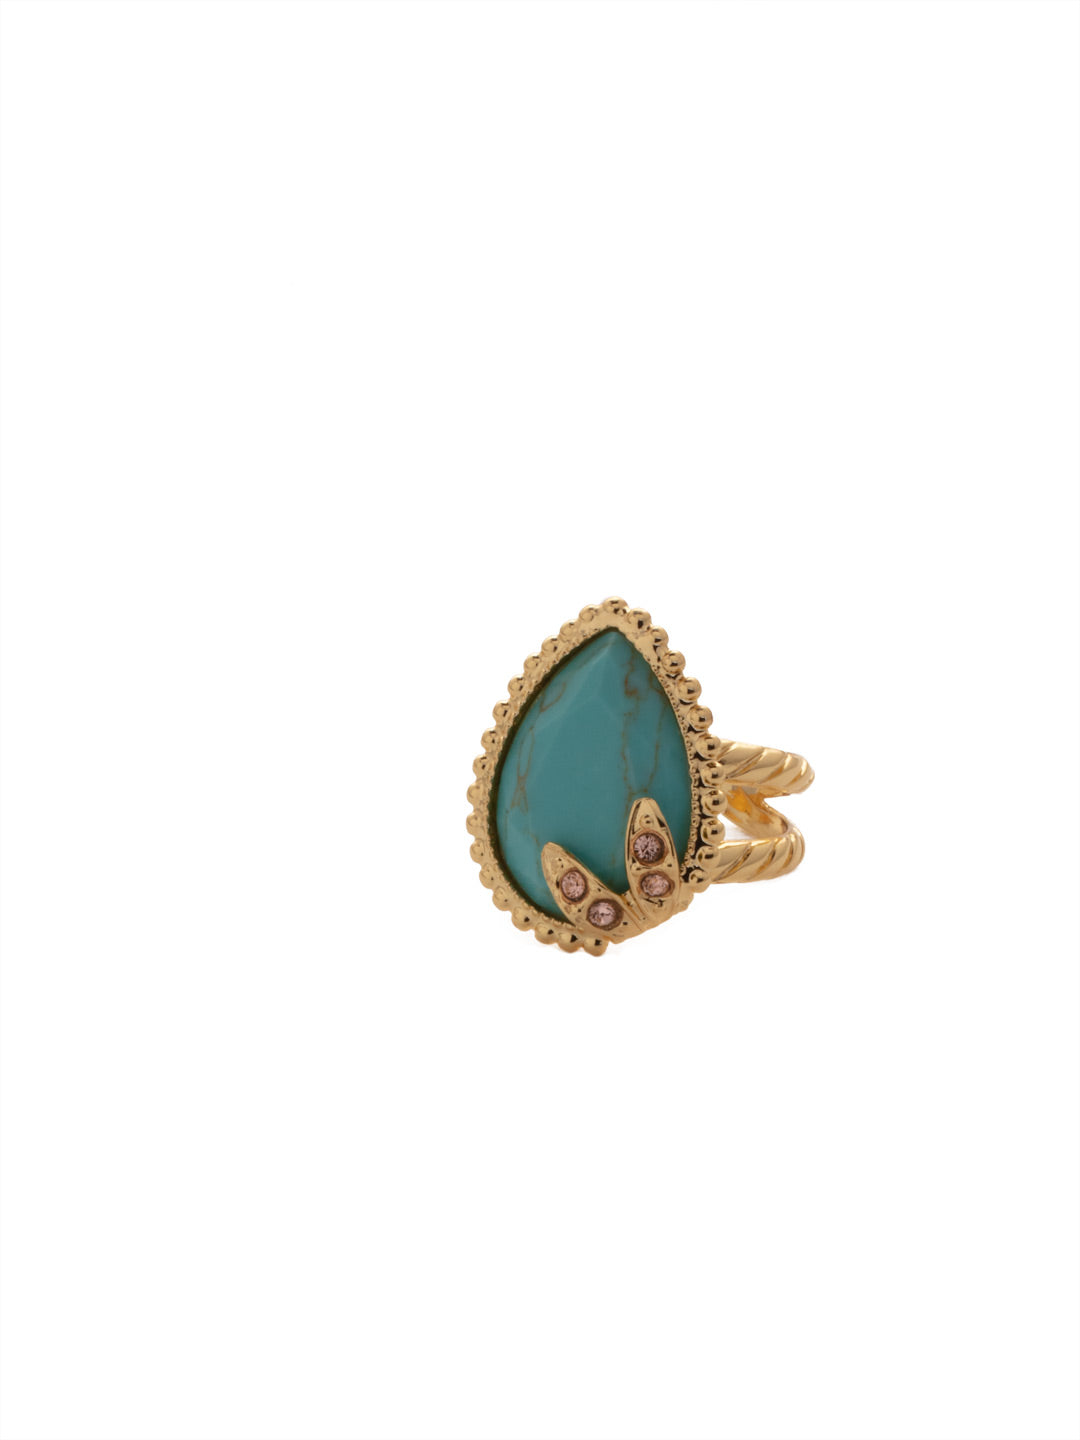 Forrest Cocktail Ring - REU10BGSOP - <p>Make a bold statement with our Forrest Cocktail Ring. Featuring an earthy pear-shaped stone wrapped in a touch of crystal sparkle, you'll have the coolest ring in the room. From Sorrelli's South Pacific collection in our Bright Gold-tone finish.</p>